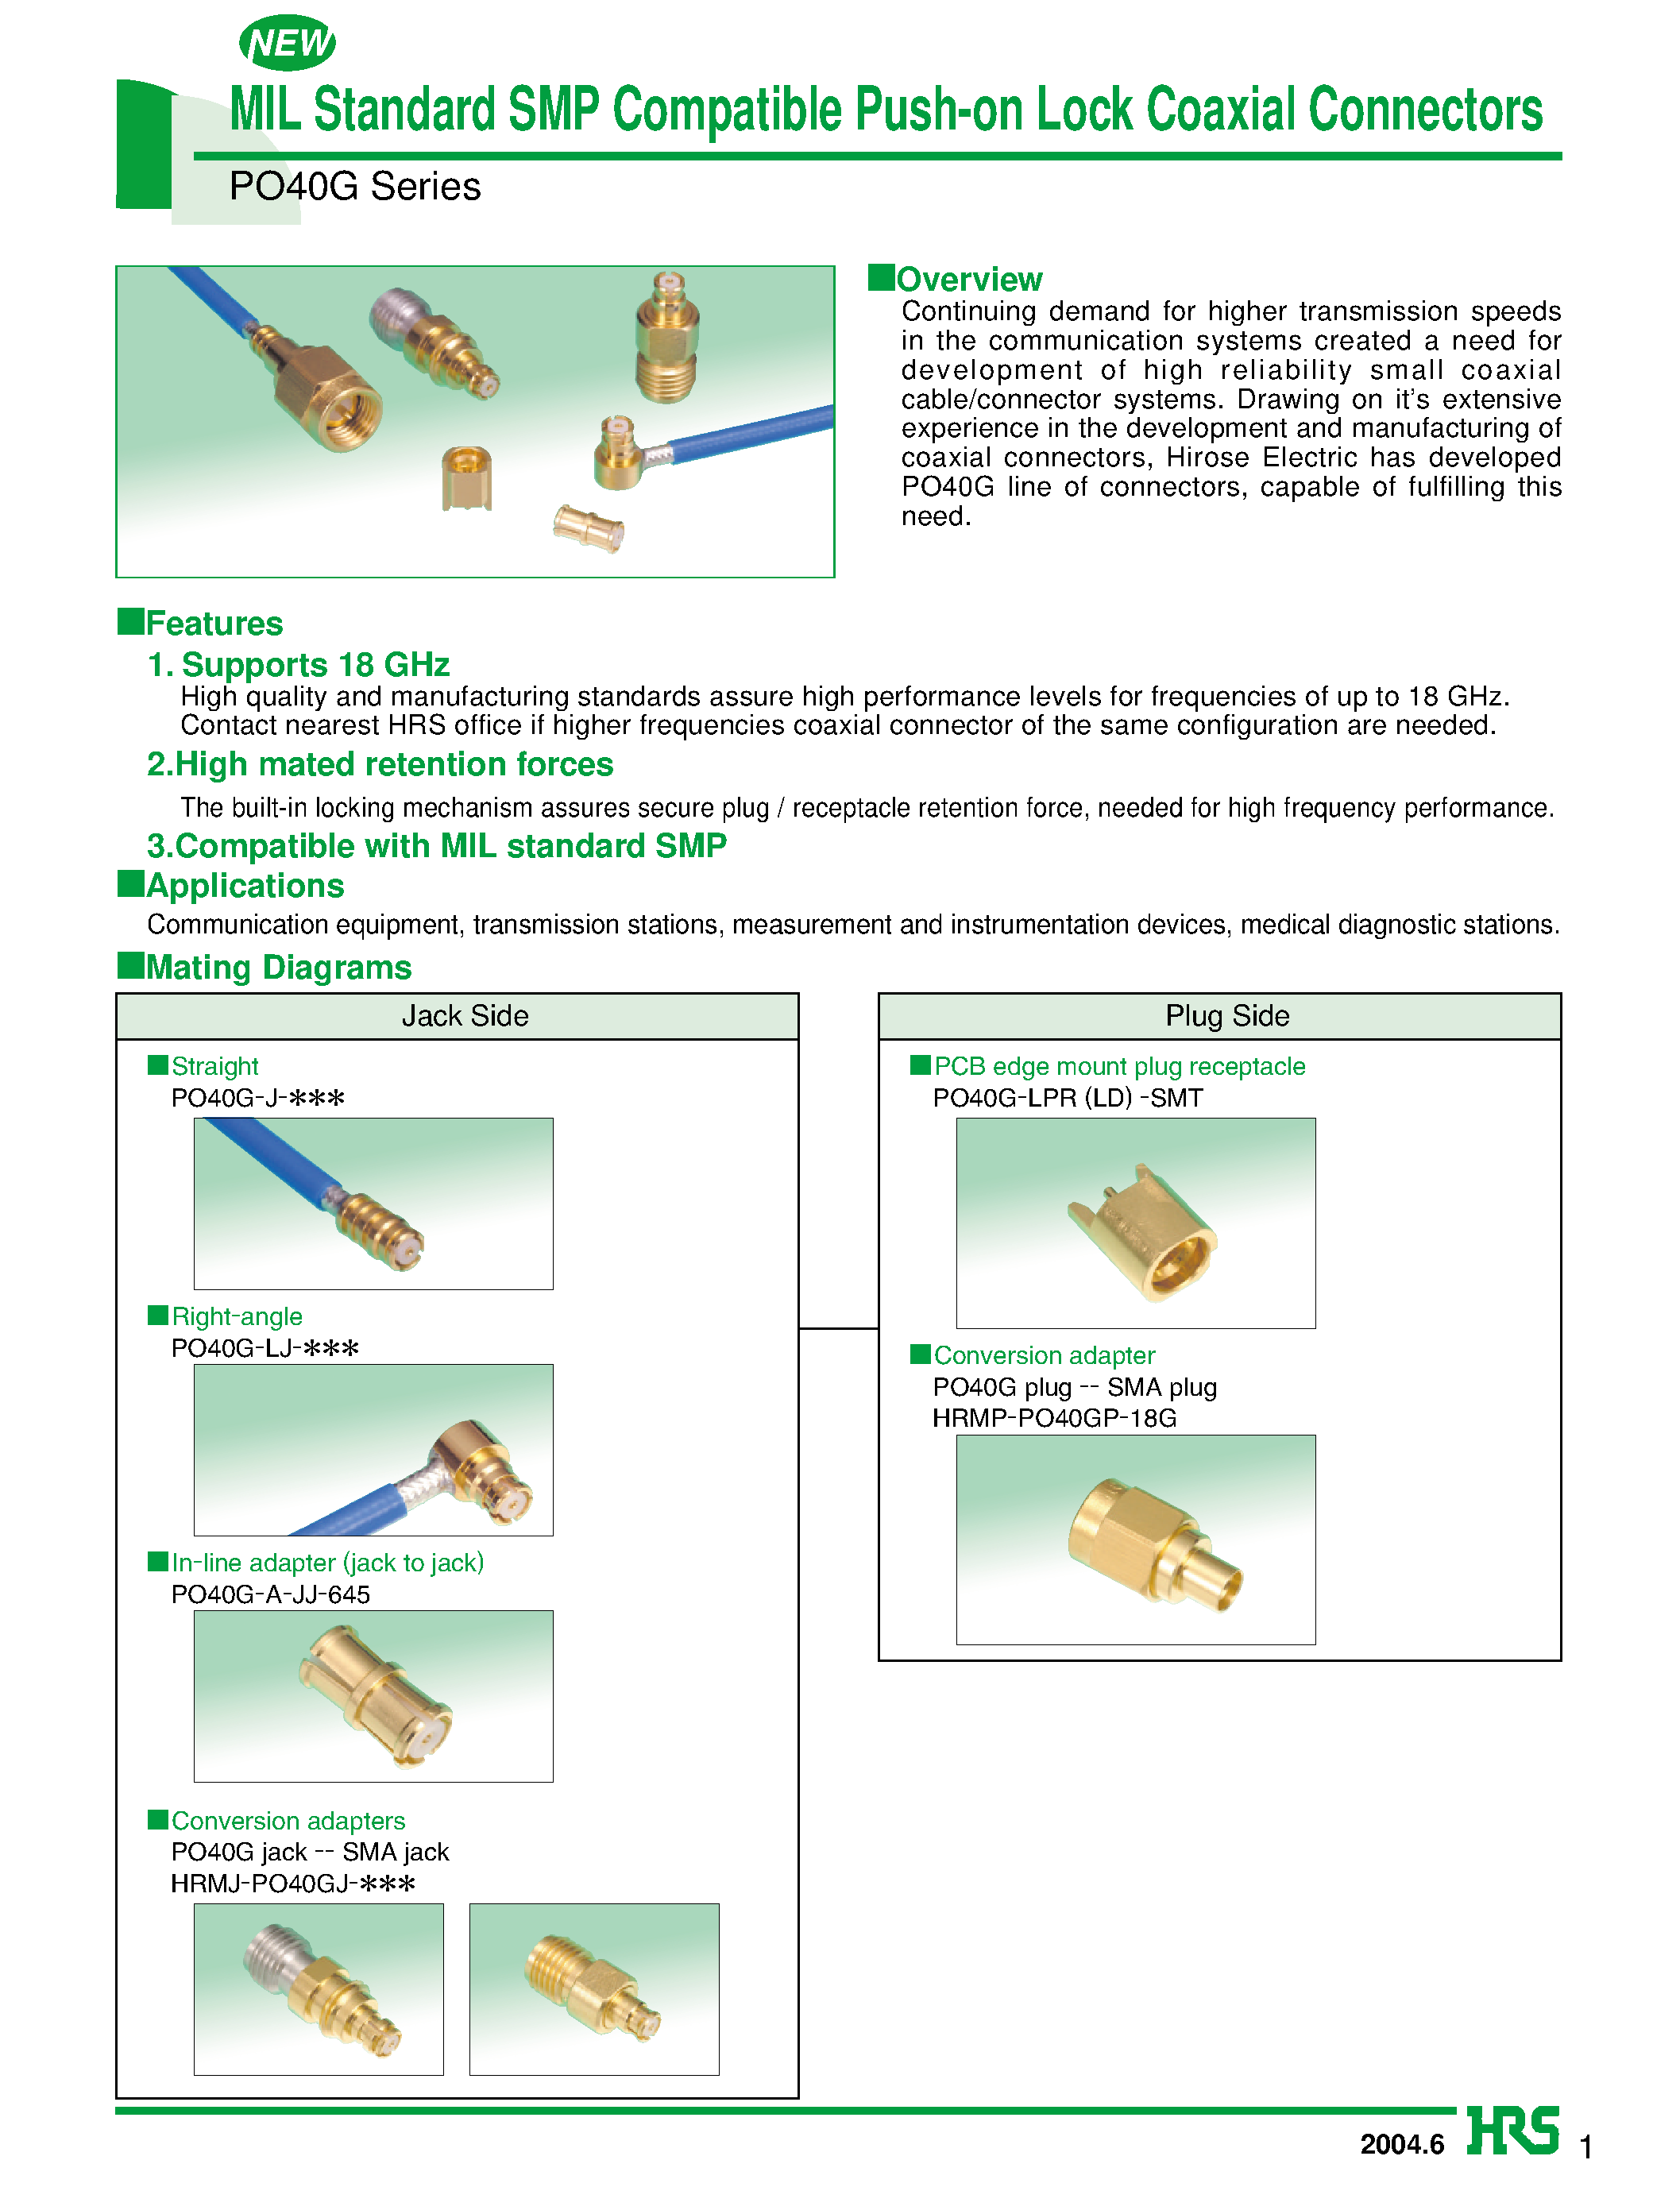 Datasheet PO40G-J-119 - MIL Standard SMP Compatible Push-on Lock Coaxial Connectors page 1